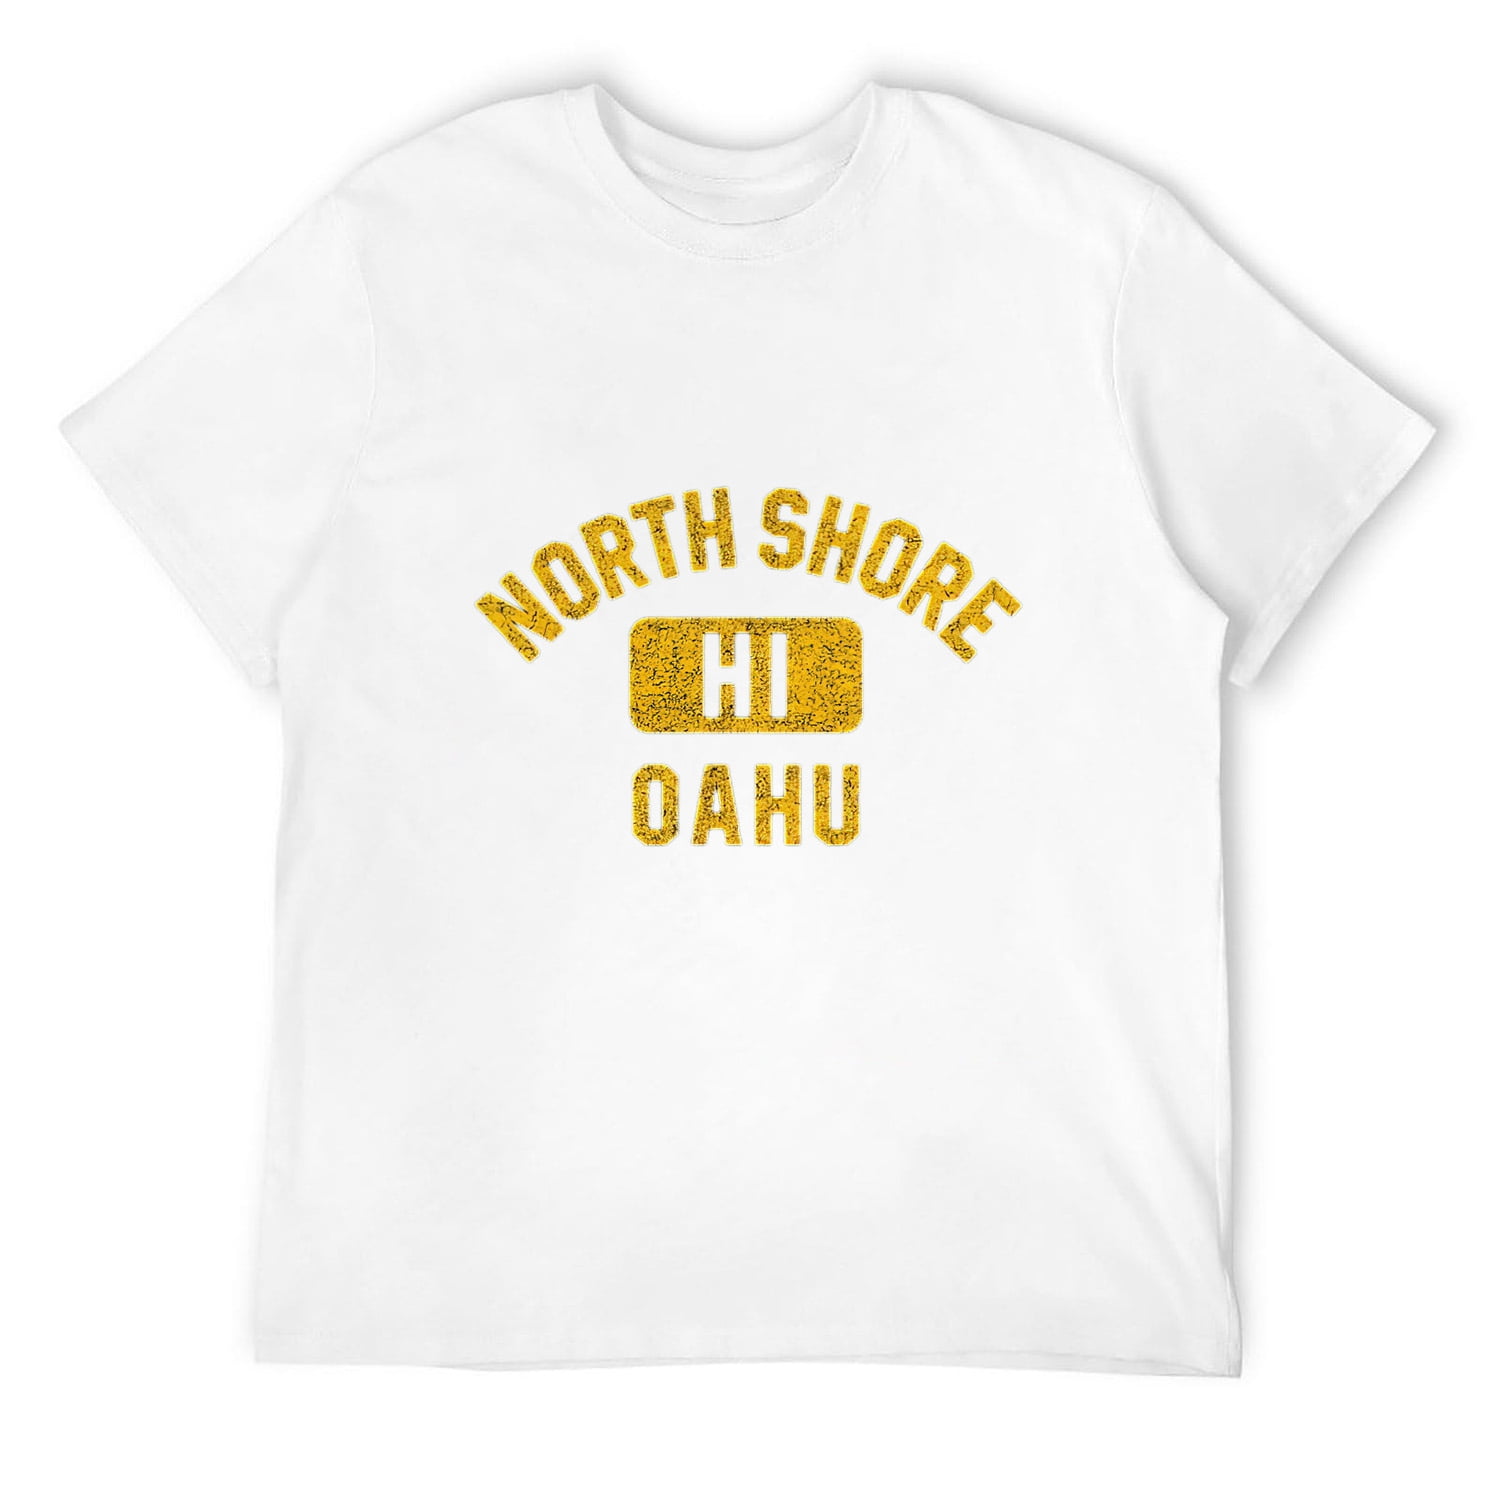 Mens North Shore Oahu Gym Style Distressed Amber Print T-Shirt White ...